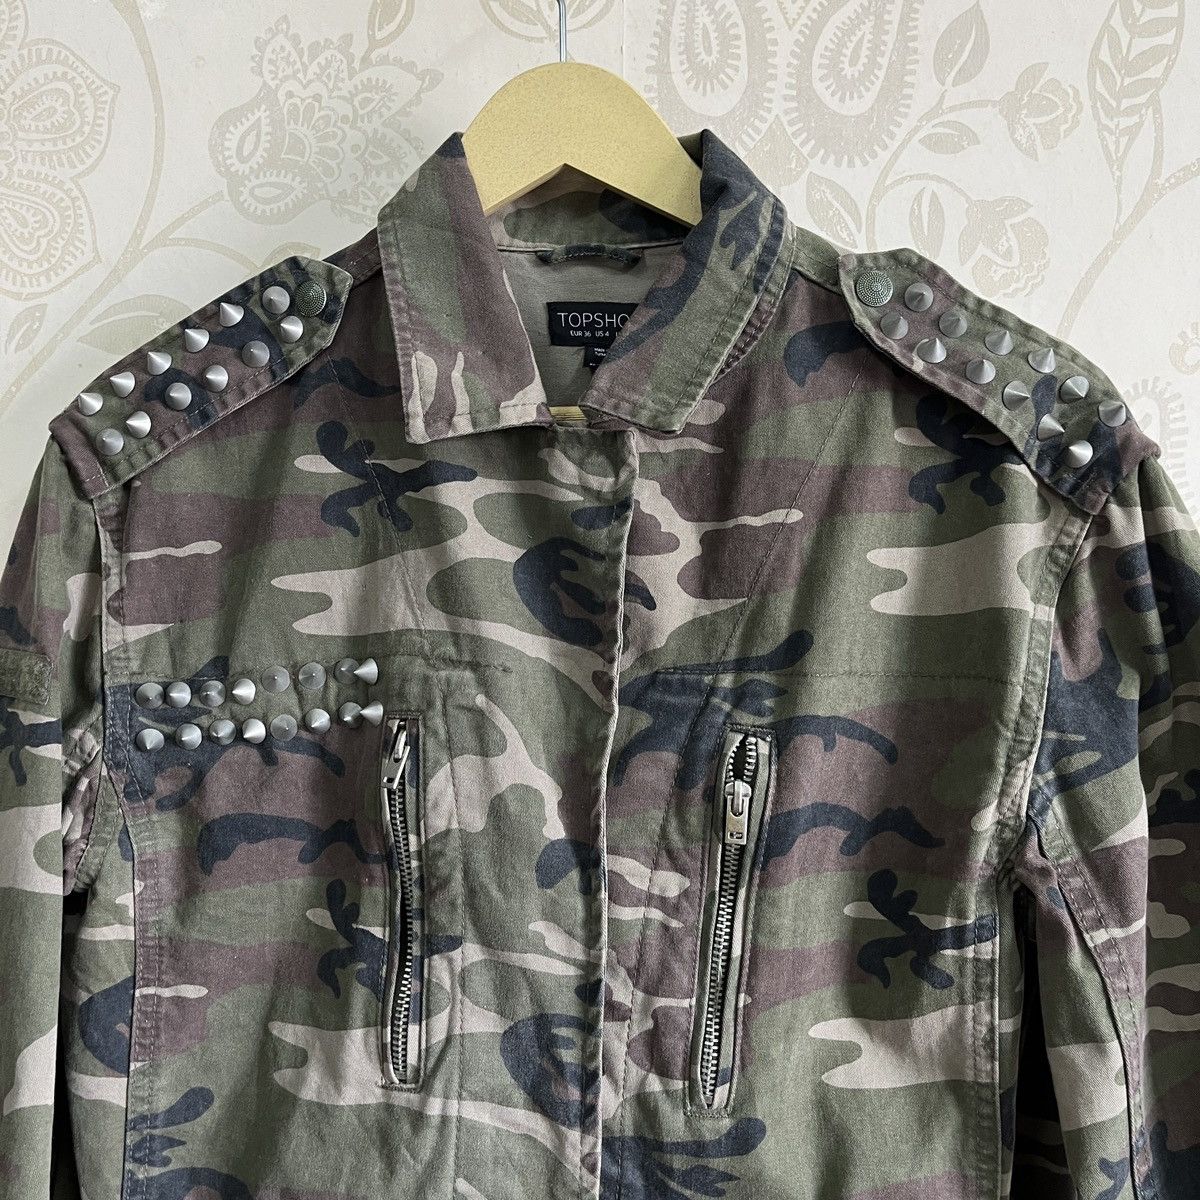 Military - Punk Army Seditionaries Jackets With Studs - 21